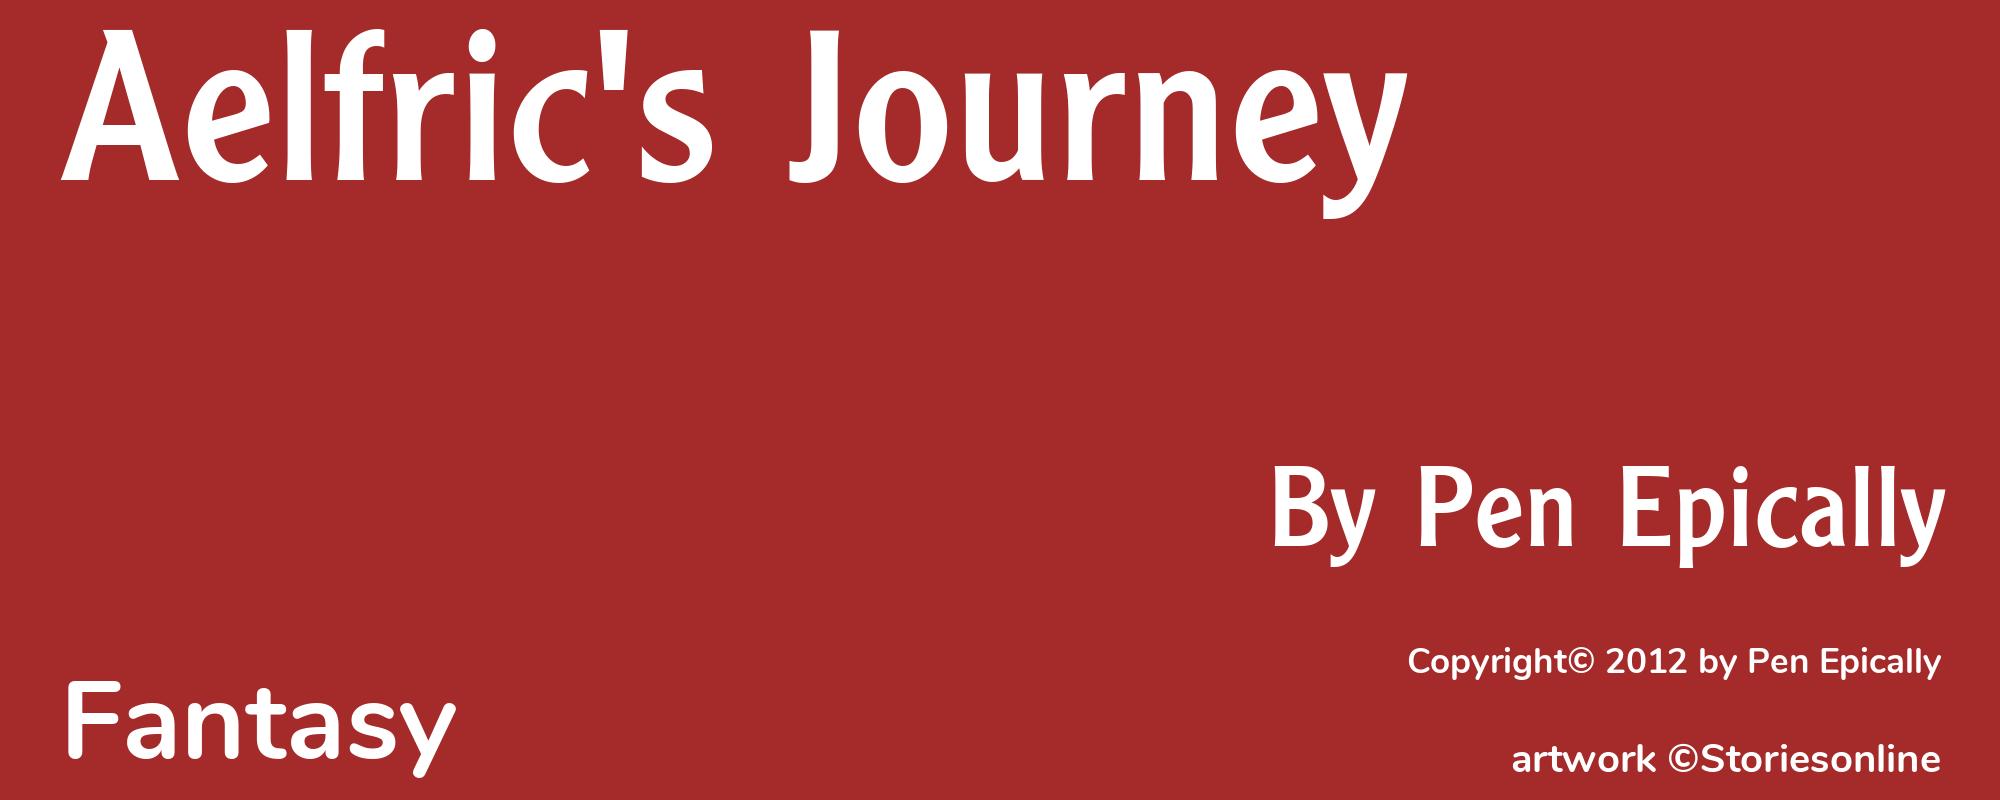 Aelfric's Journey - Cover